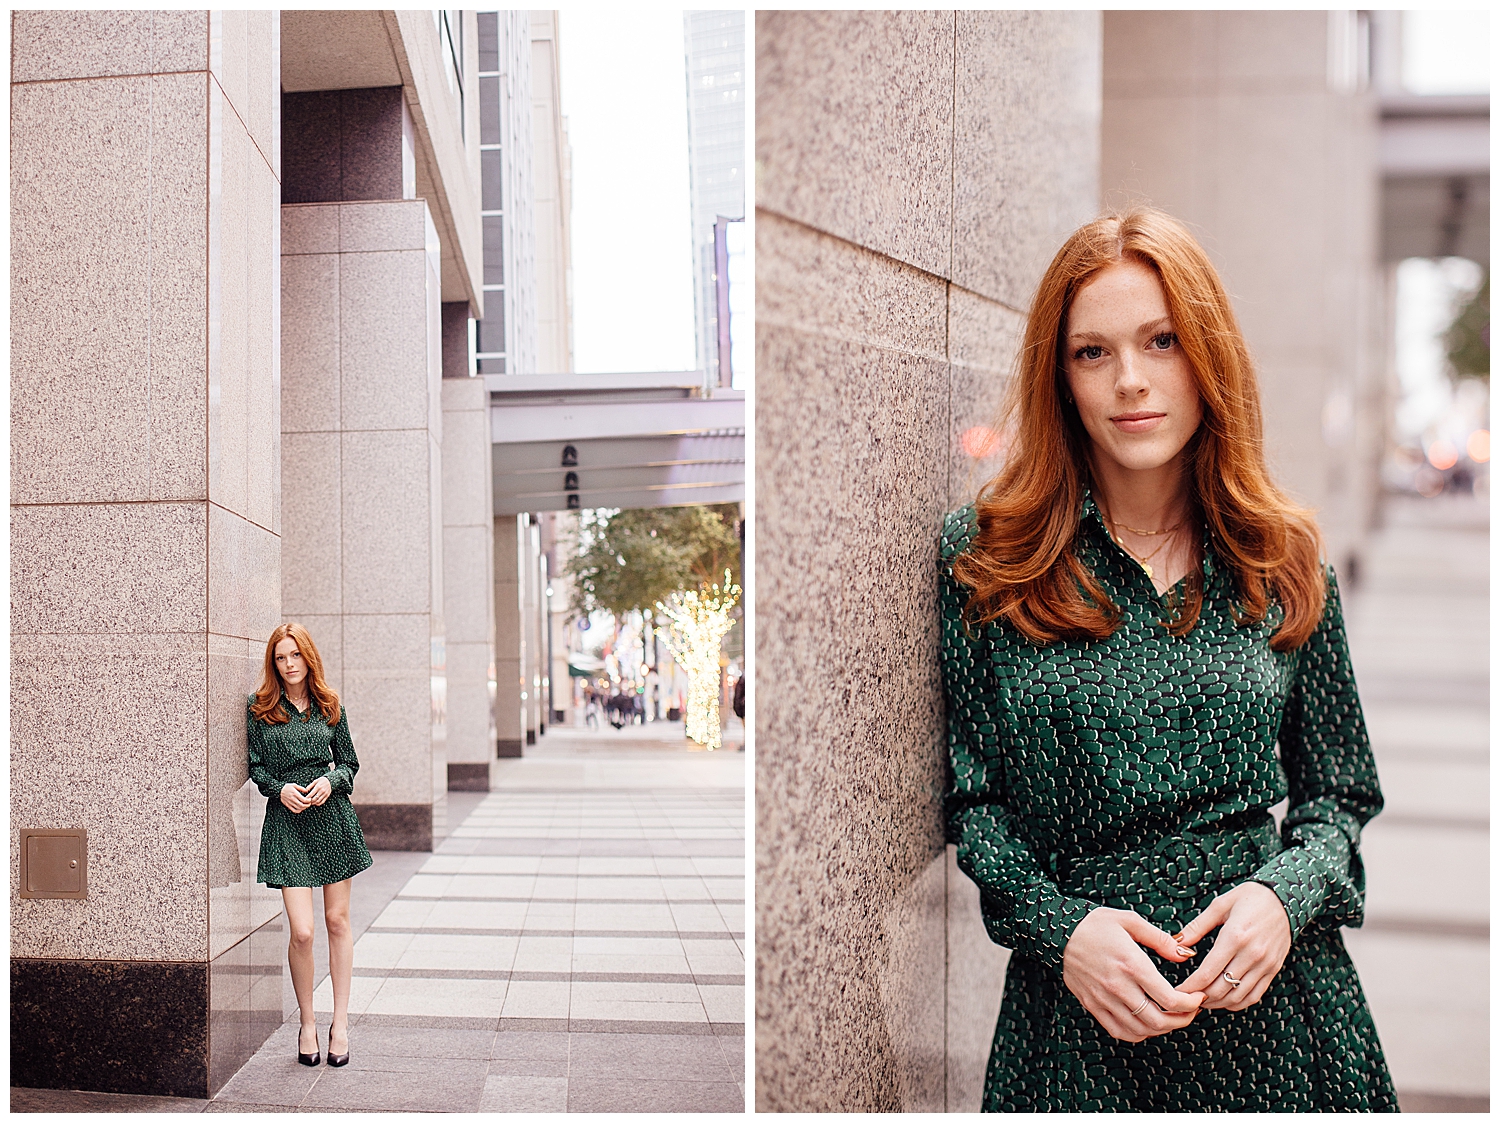 downtown Houston senior photography with girl in green dress leaning against cream building